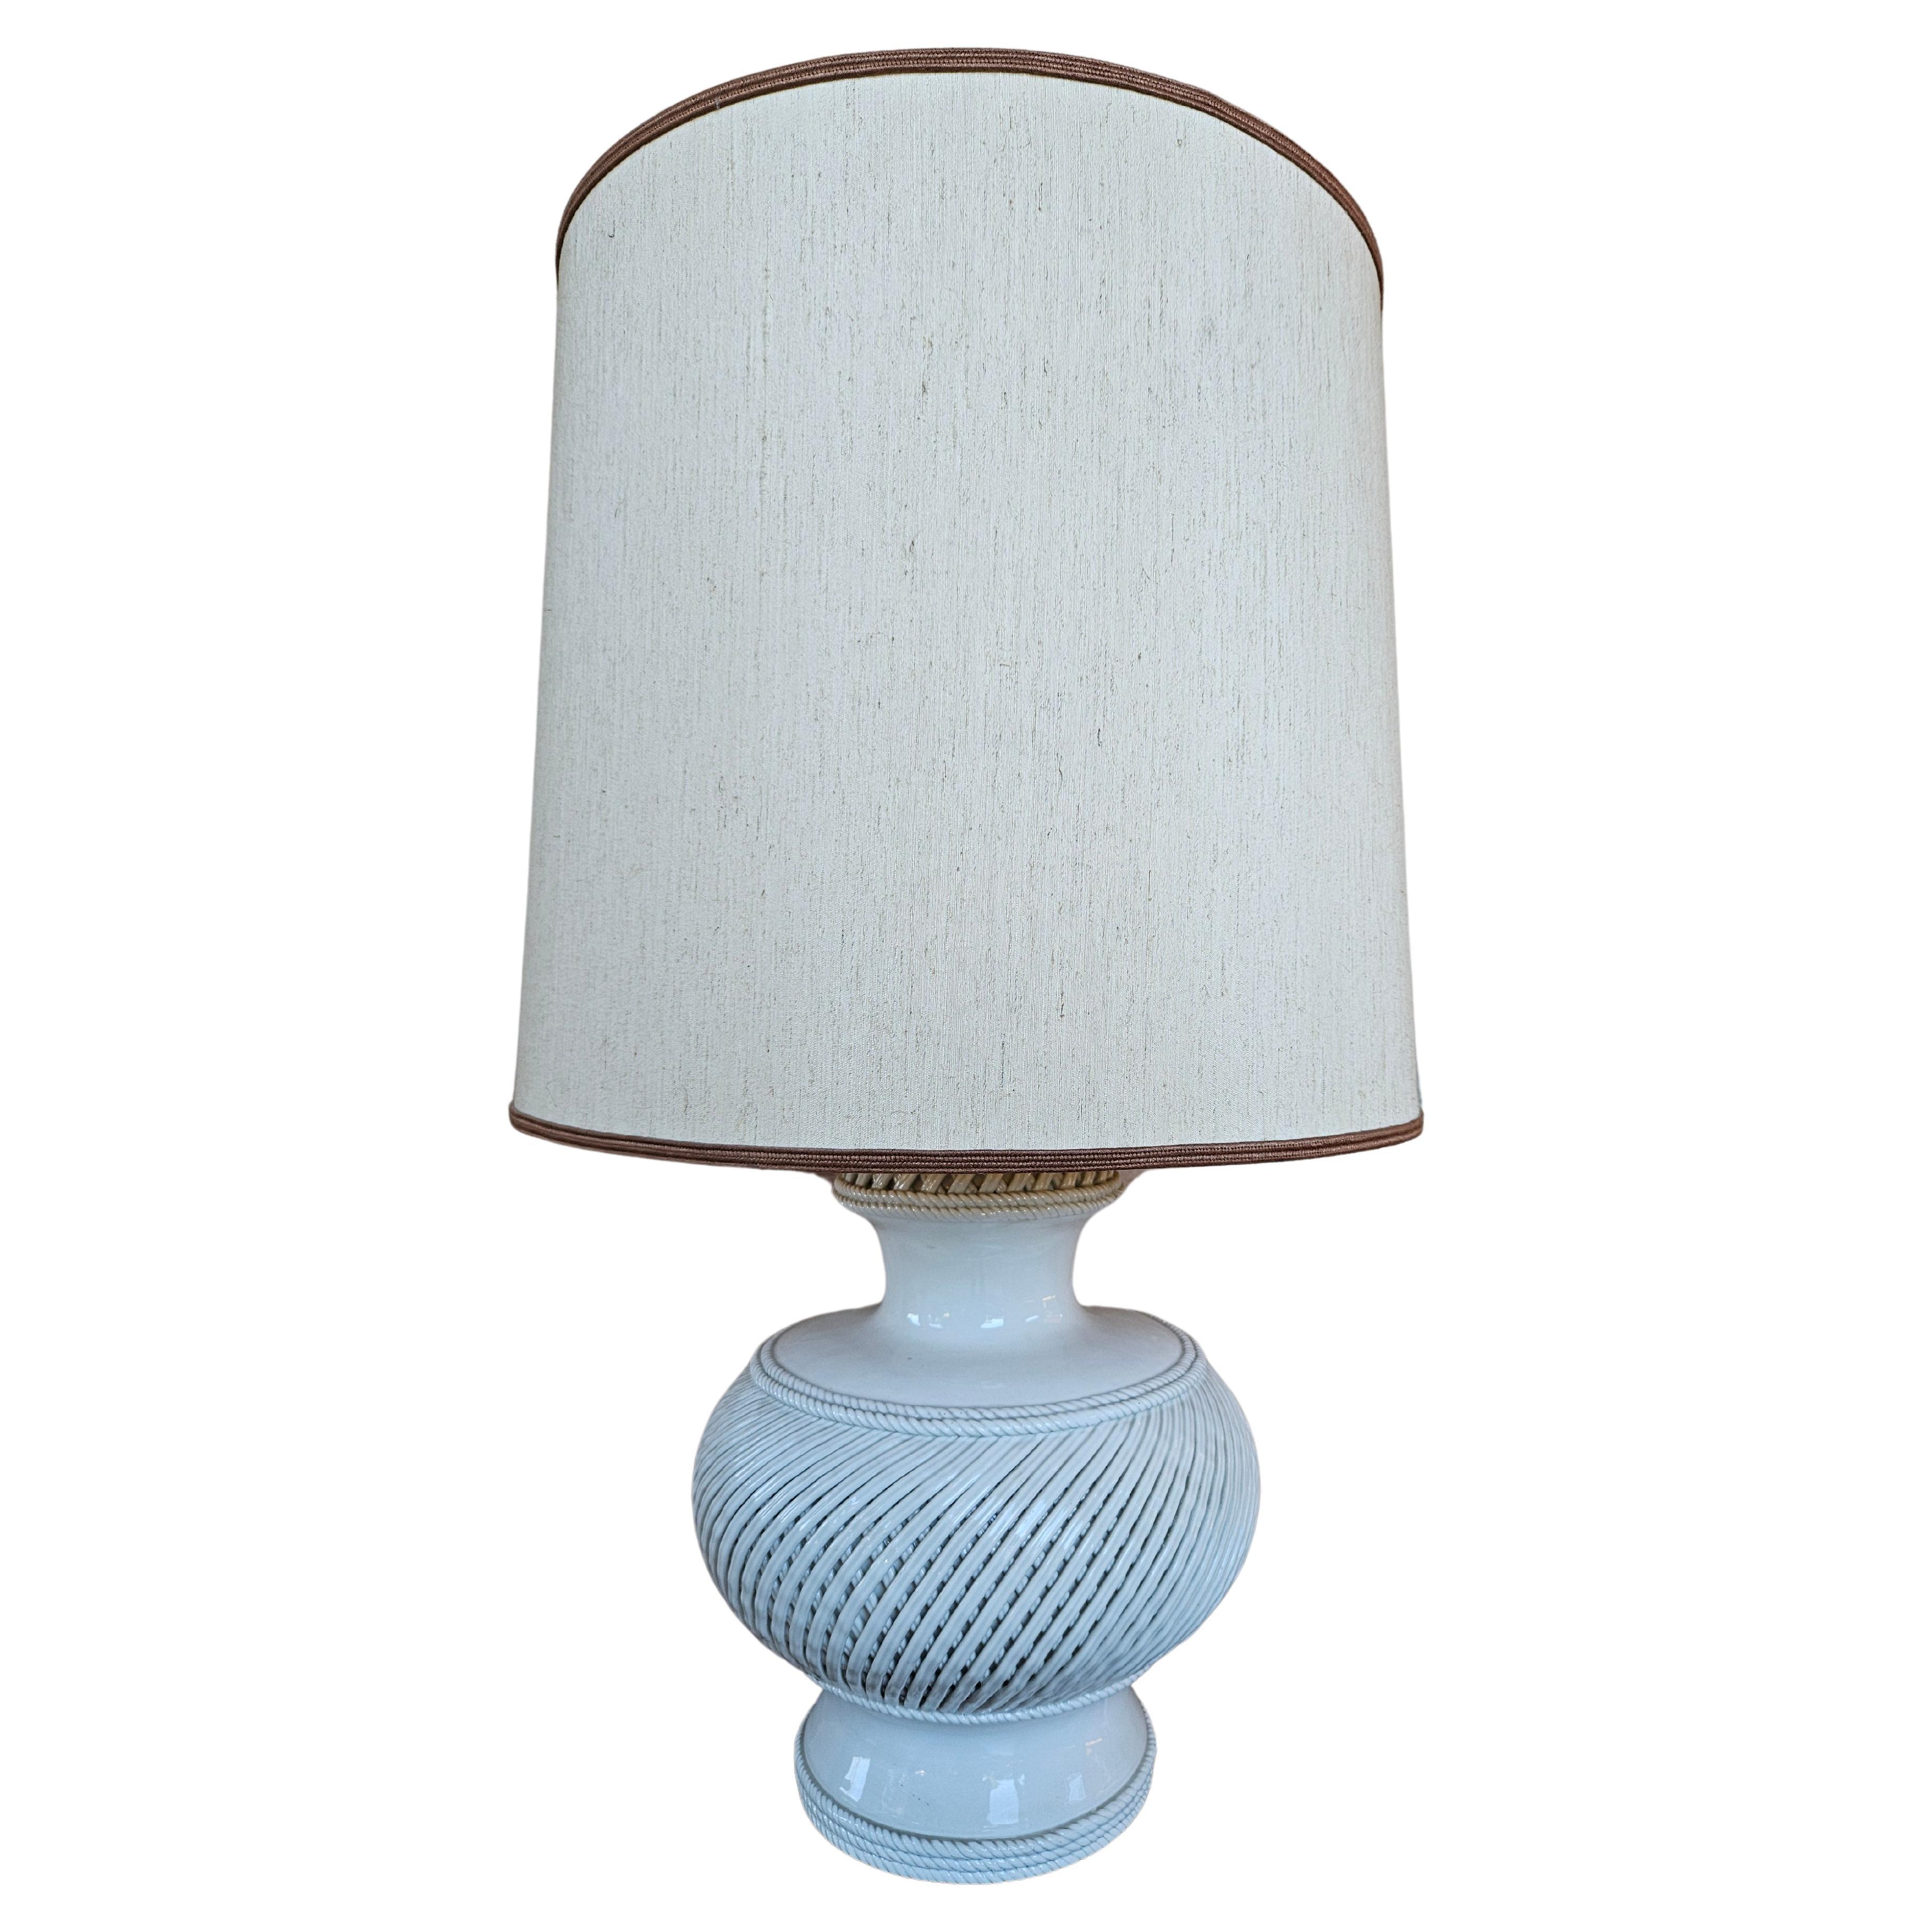 Vintage white ceramic table lamp with shade